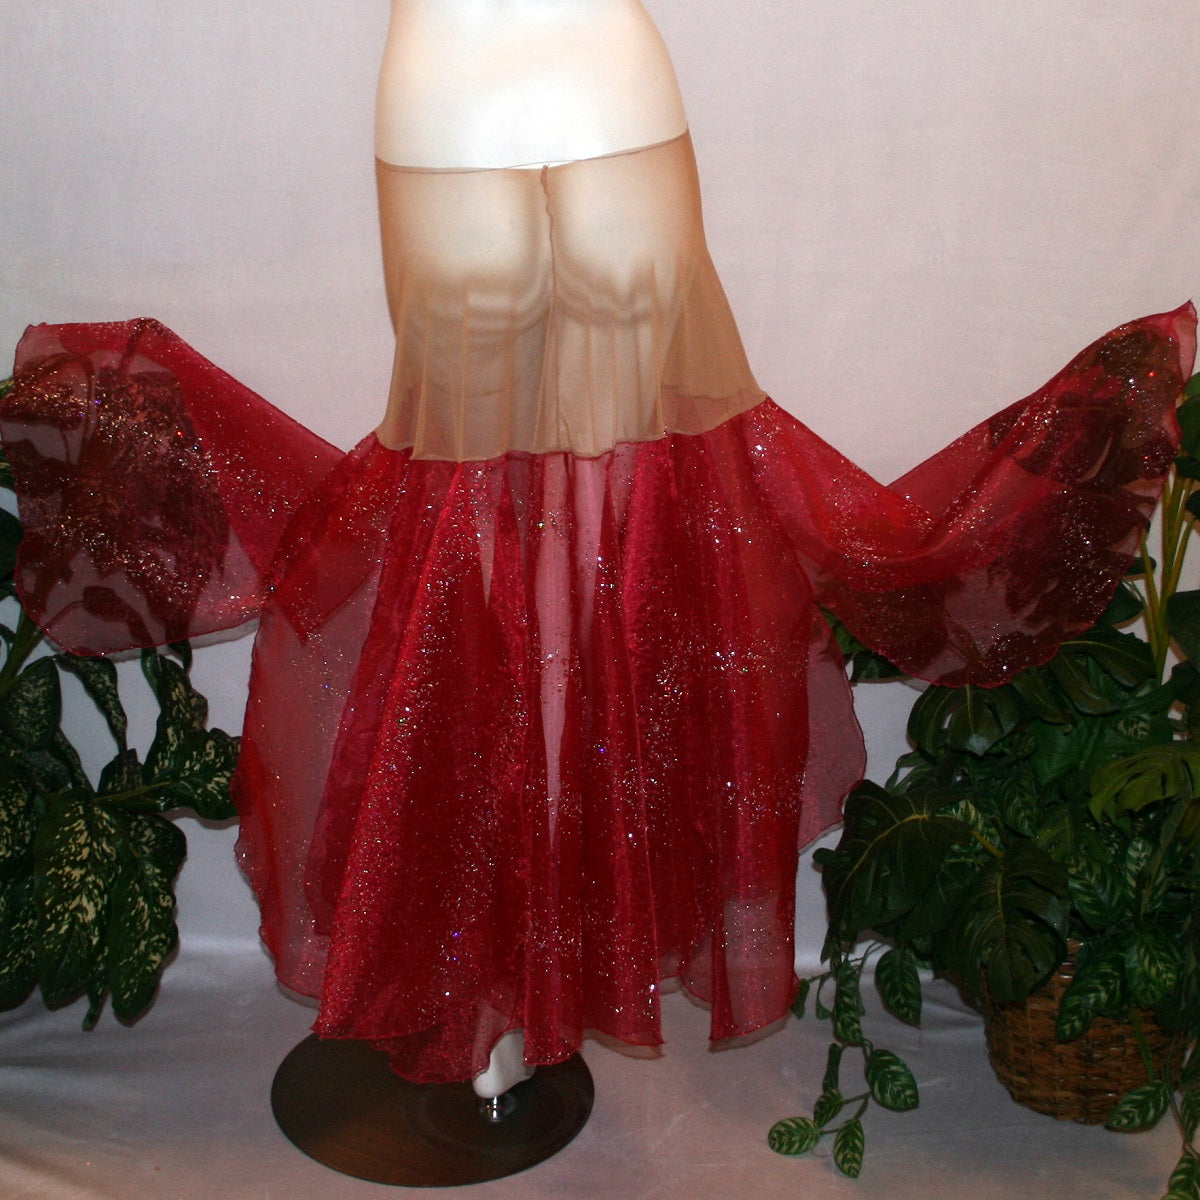 flaired back view of Red ballroom skirt created on a nude illusion hip band of yards of scarlette red panels with silver & pearlized flecking, very cool & showy!